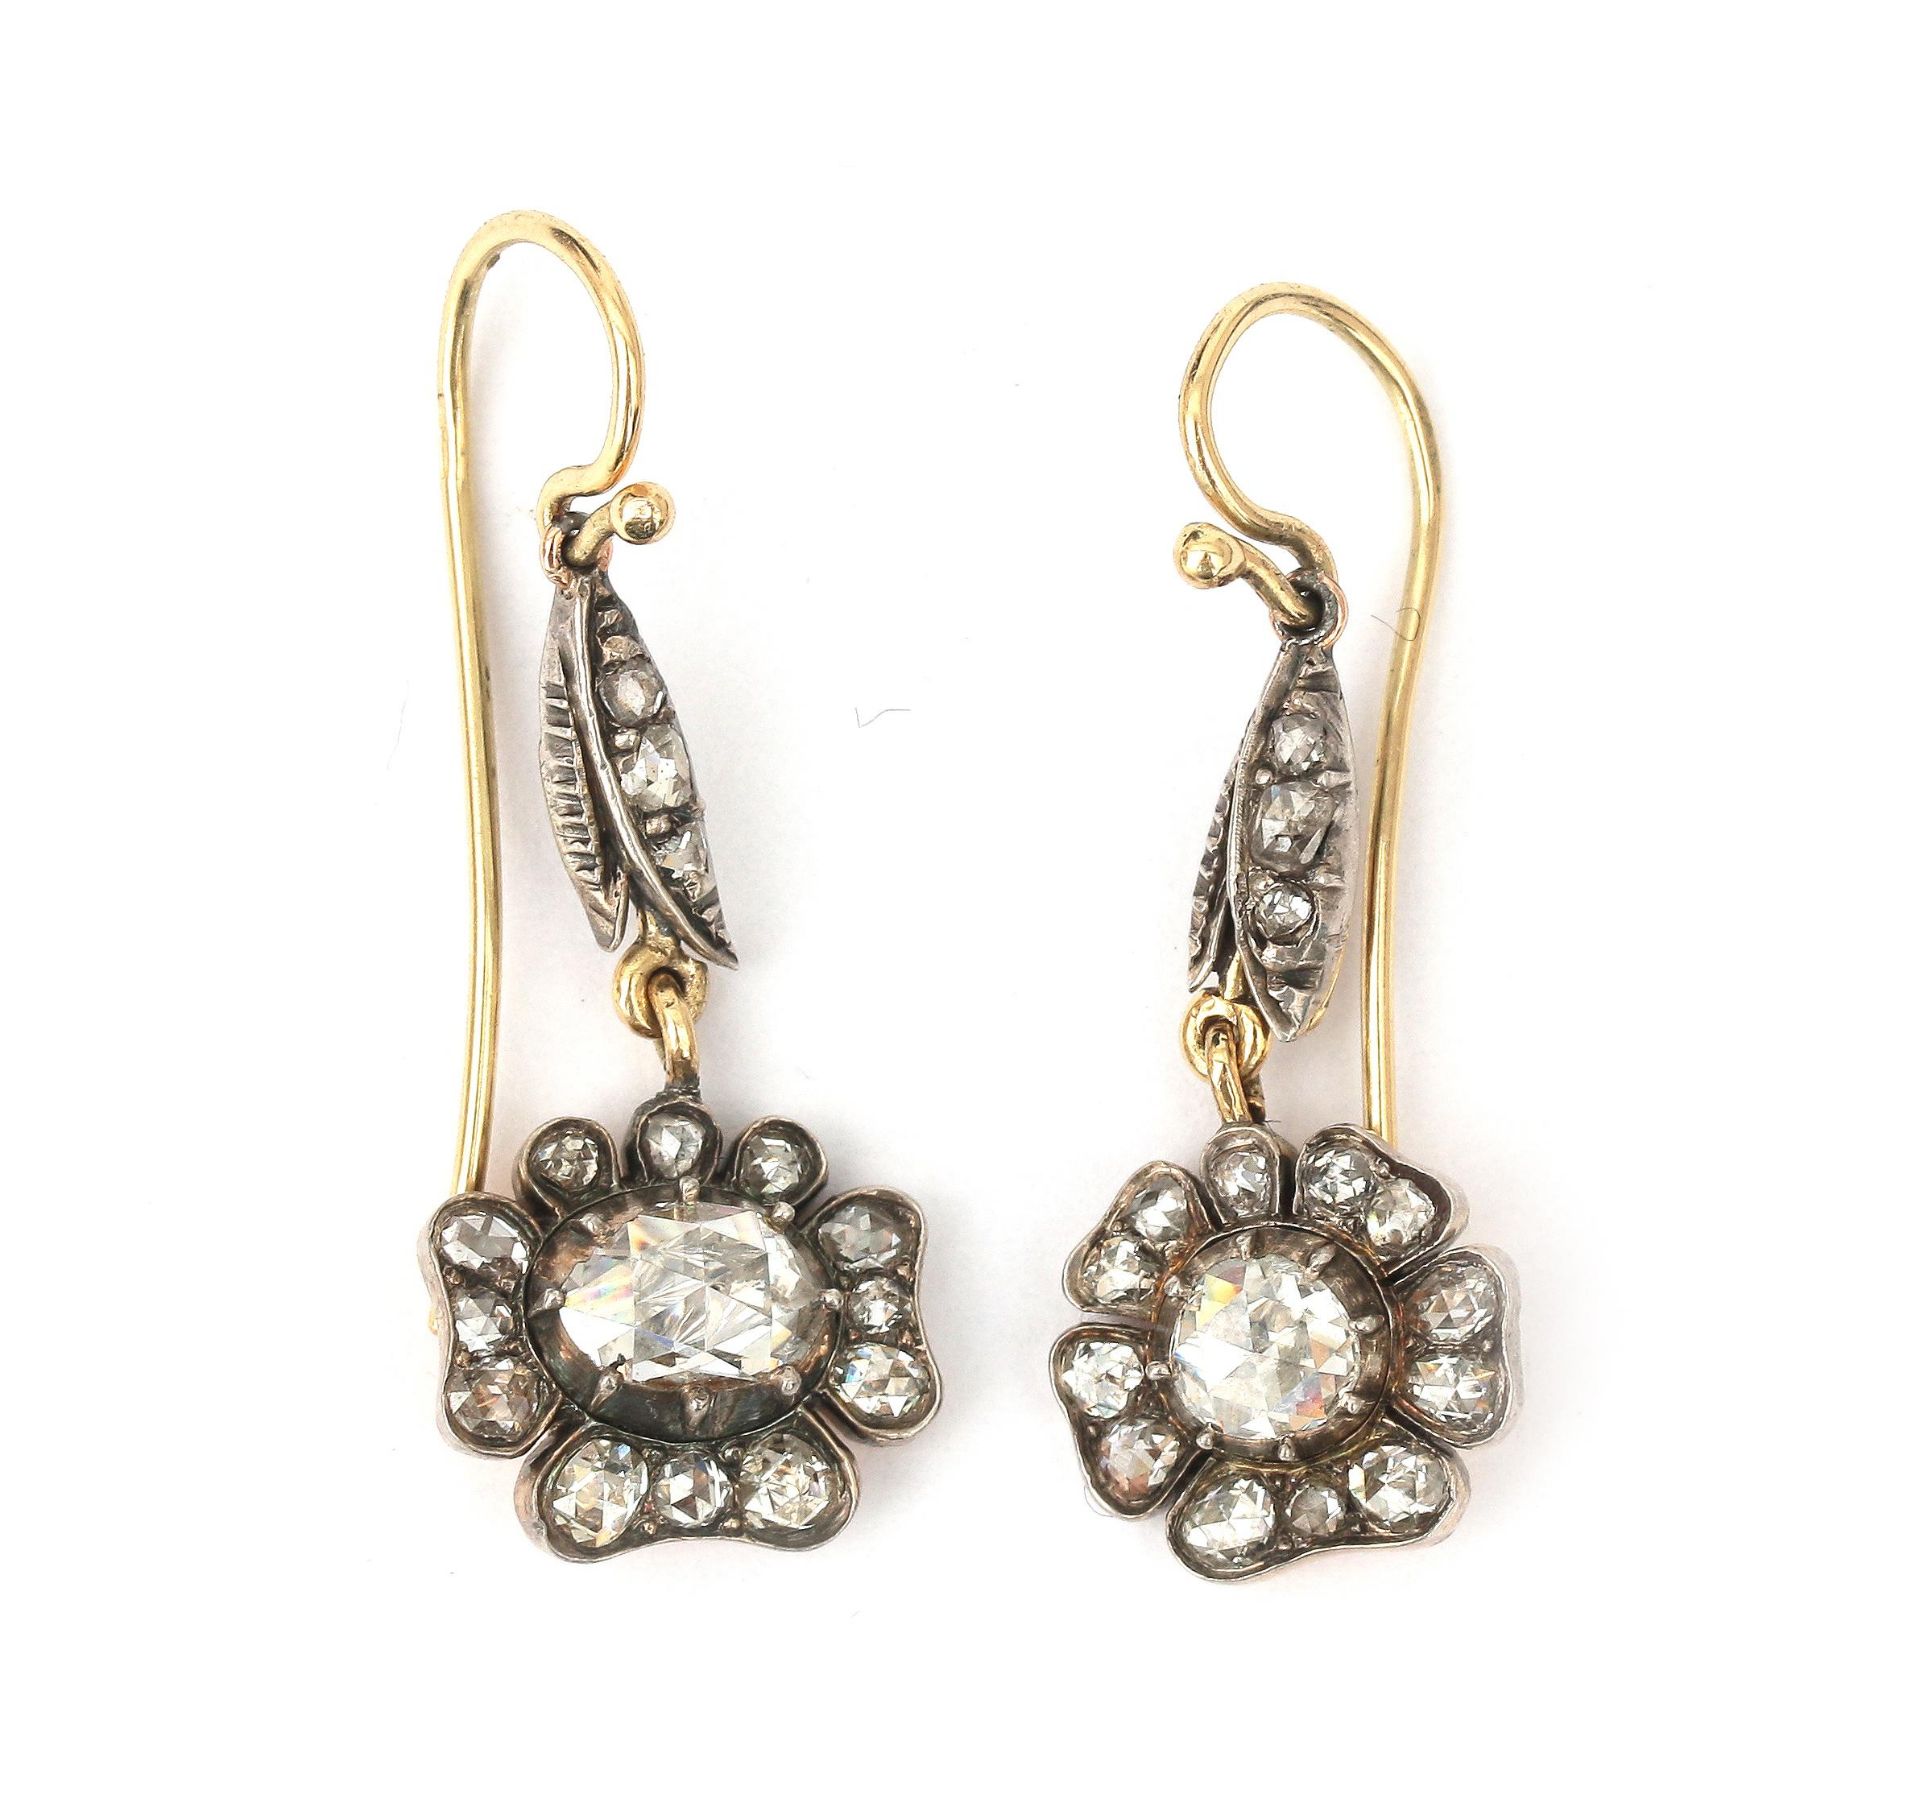 A pair of 14 karat gold and silver rose cut diamond cluster earrings